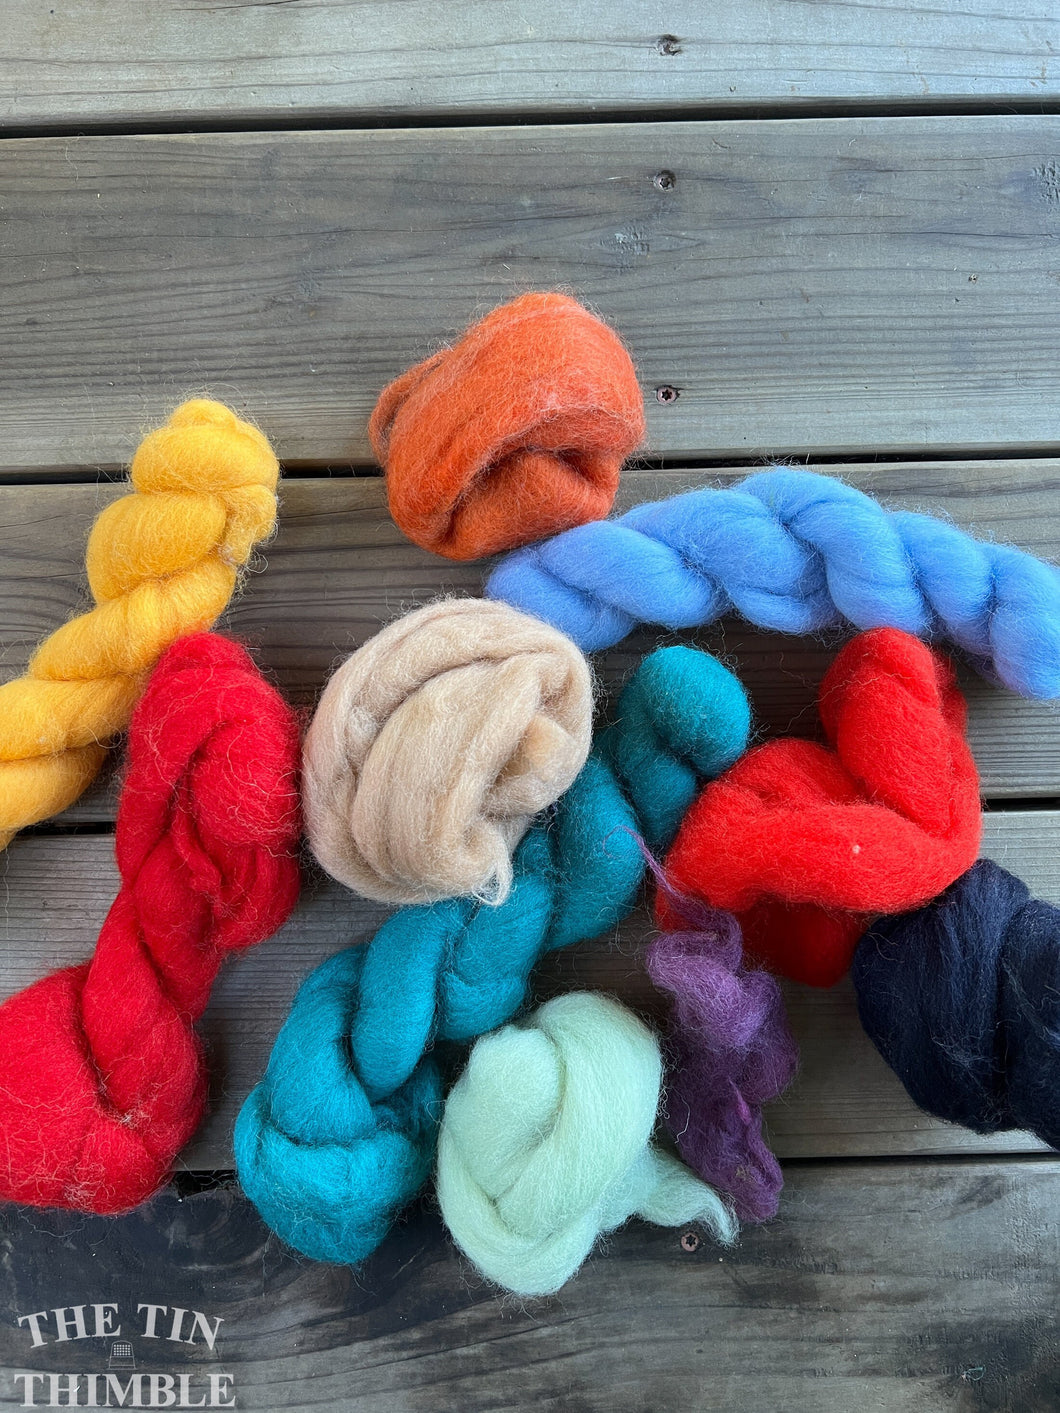 Corriedale Roving Destash Mixed Bag - 6 Ounces - Assorted Hand Dyed, Commercially Dyed, Corriedale and Course Breed Wool Roving